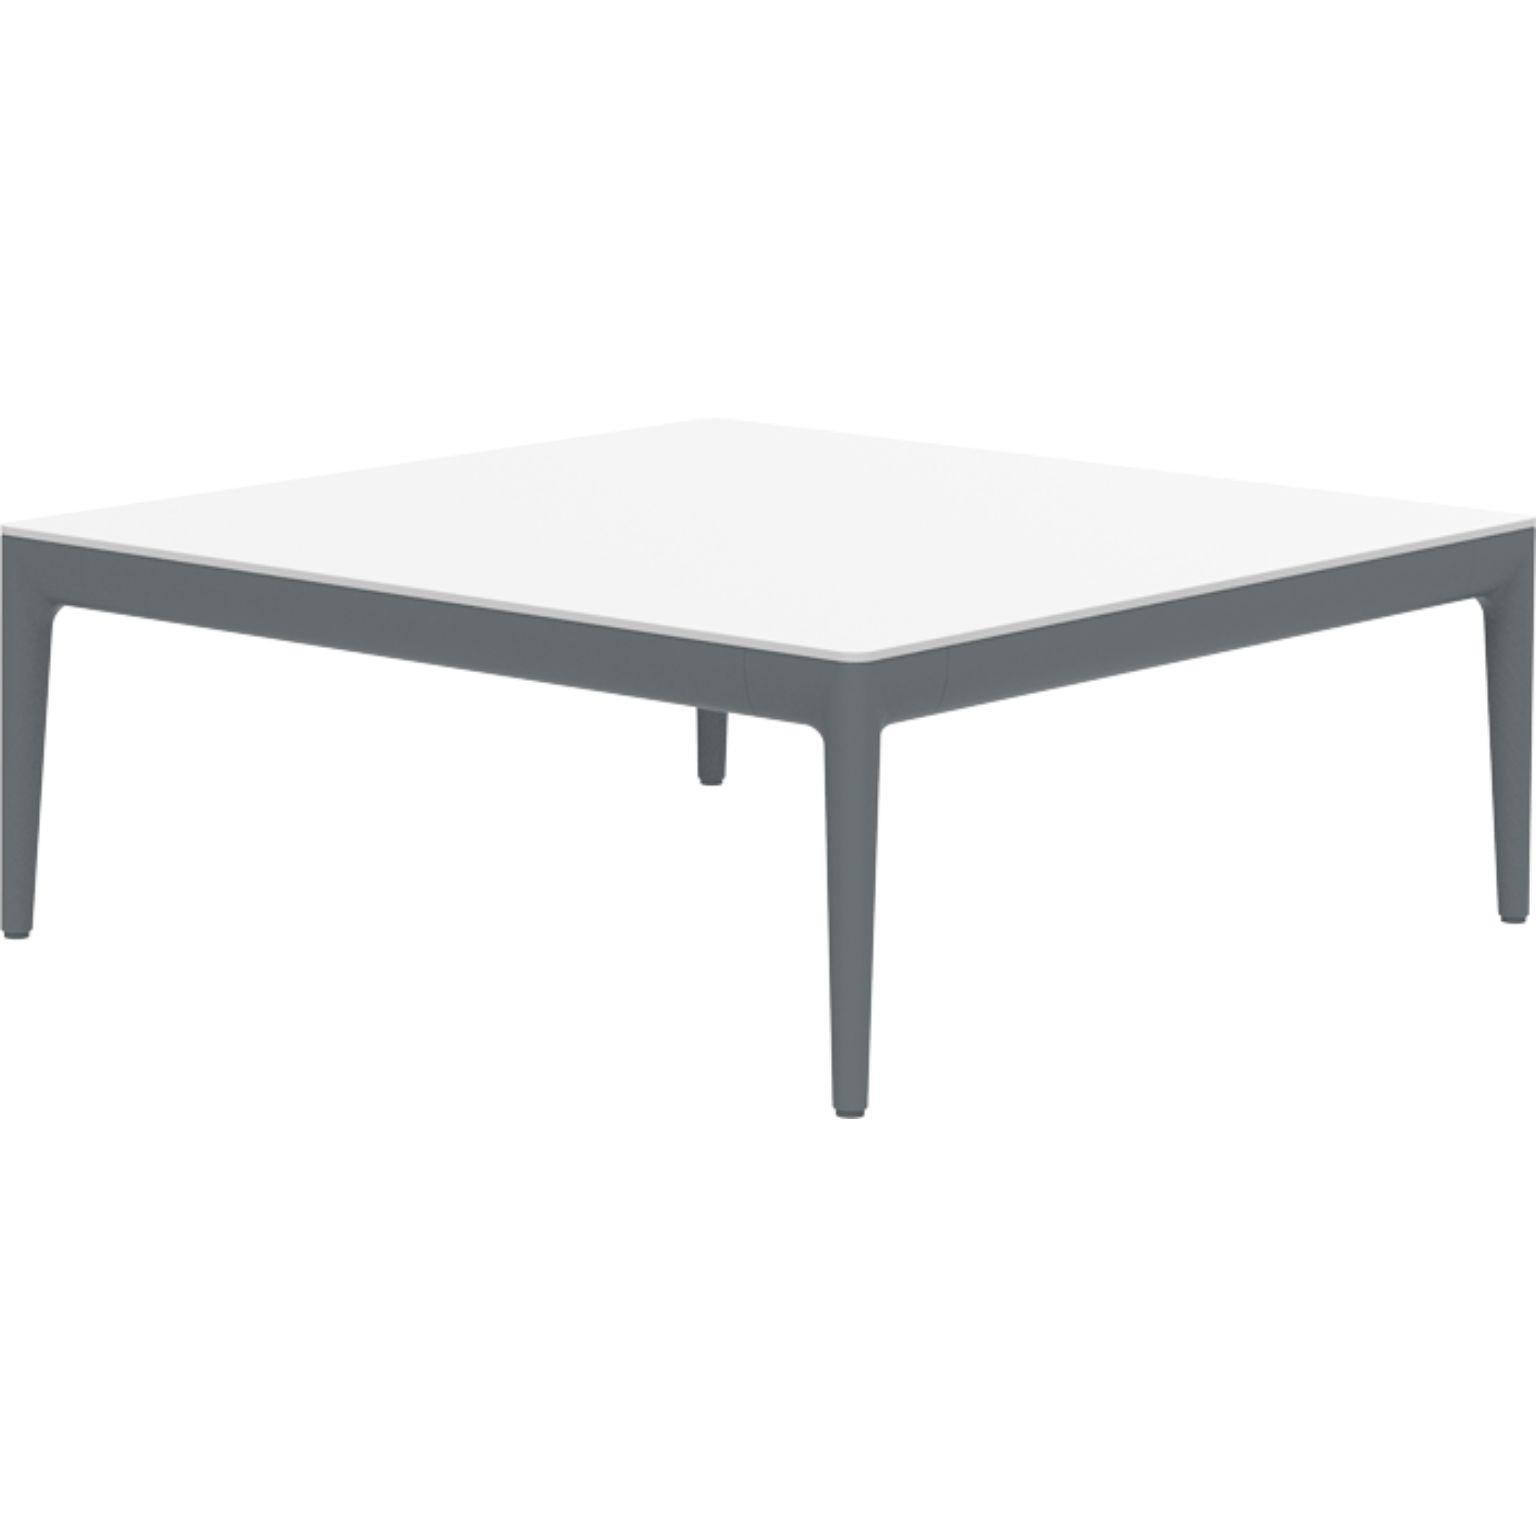 Ribbons Grey 76 coffee table by MOWEE
Dimensions: D76 x W76 x H29 cm
Material: Aluminum and HPL top.
Weight: 12 kg.
Also available in different colors and finishes. (HPL Black Edge or Neolith top). 

An unmistakable collection for its beauty